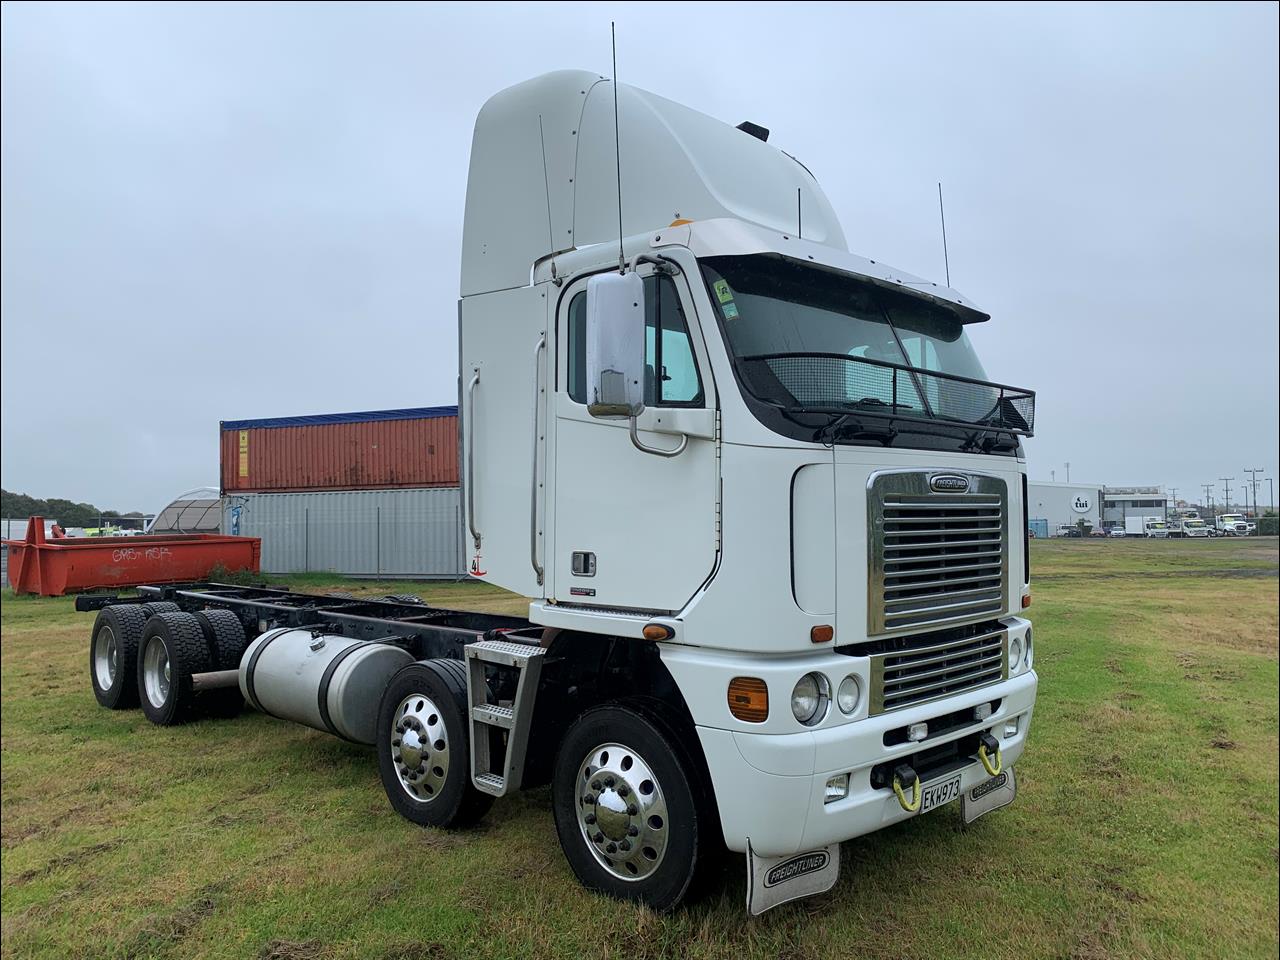 2008 Freightliner ARGOSY - 8x4 Cab Chassis